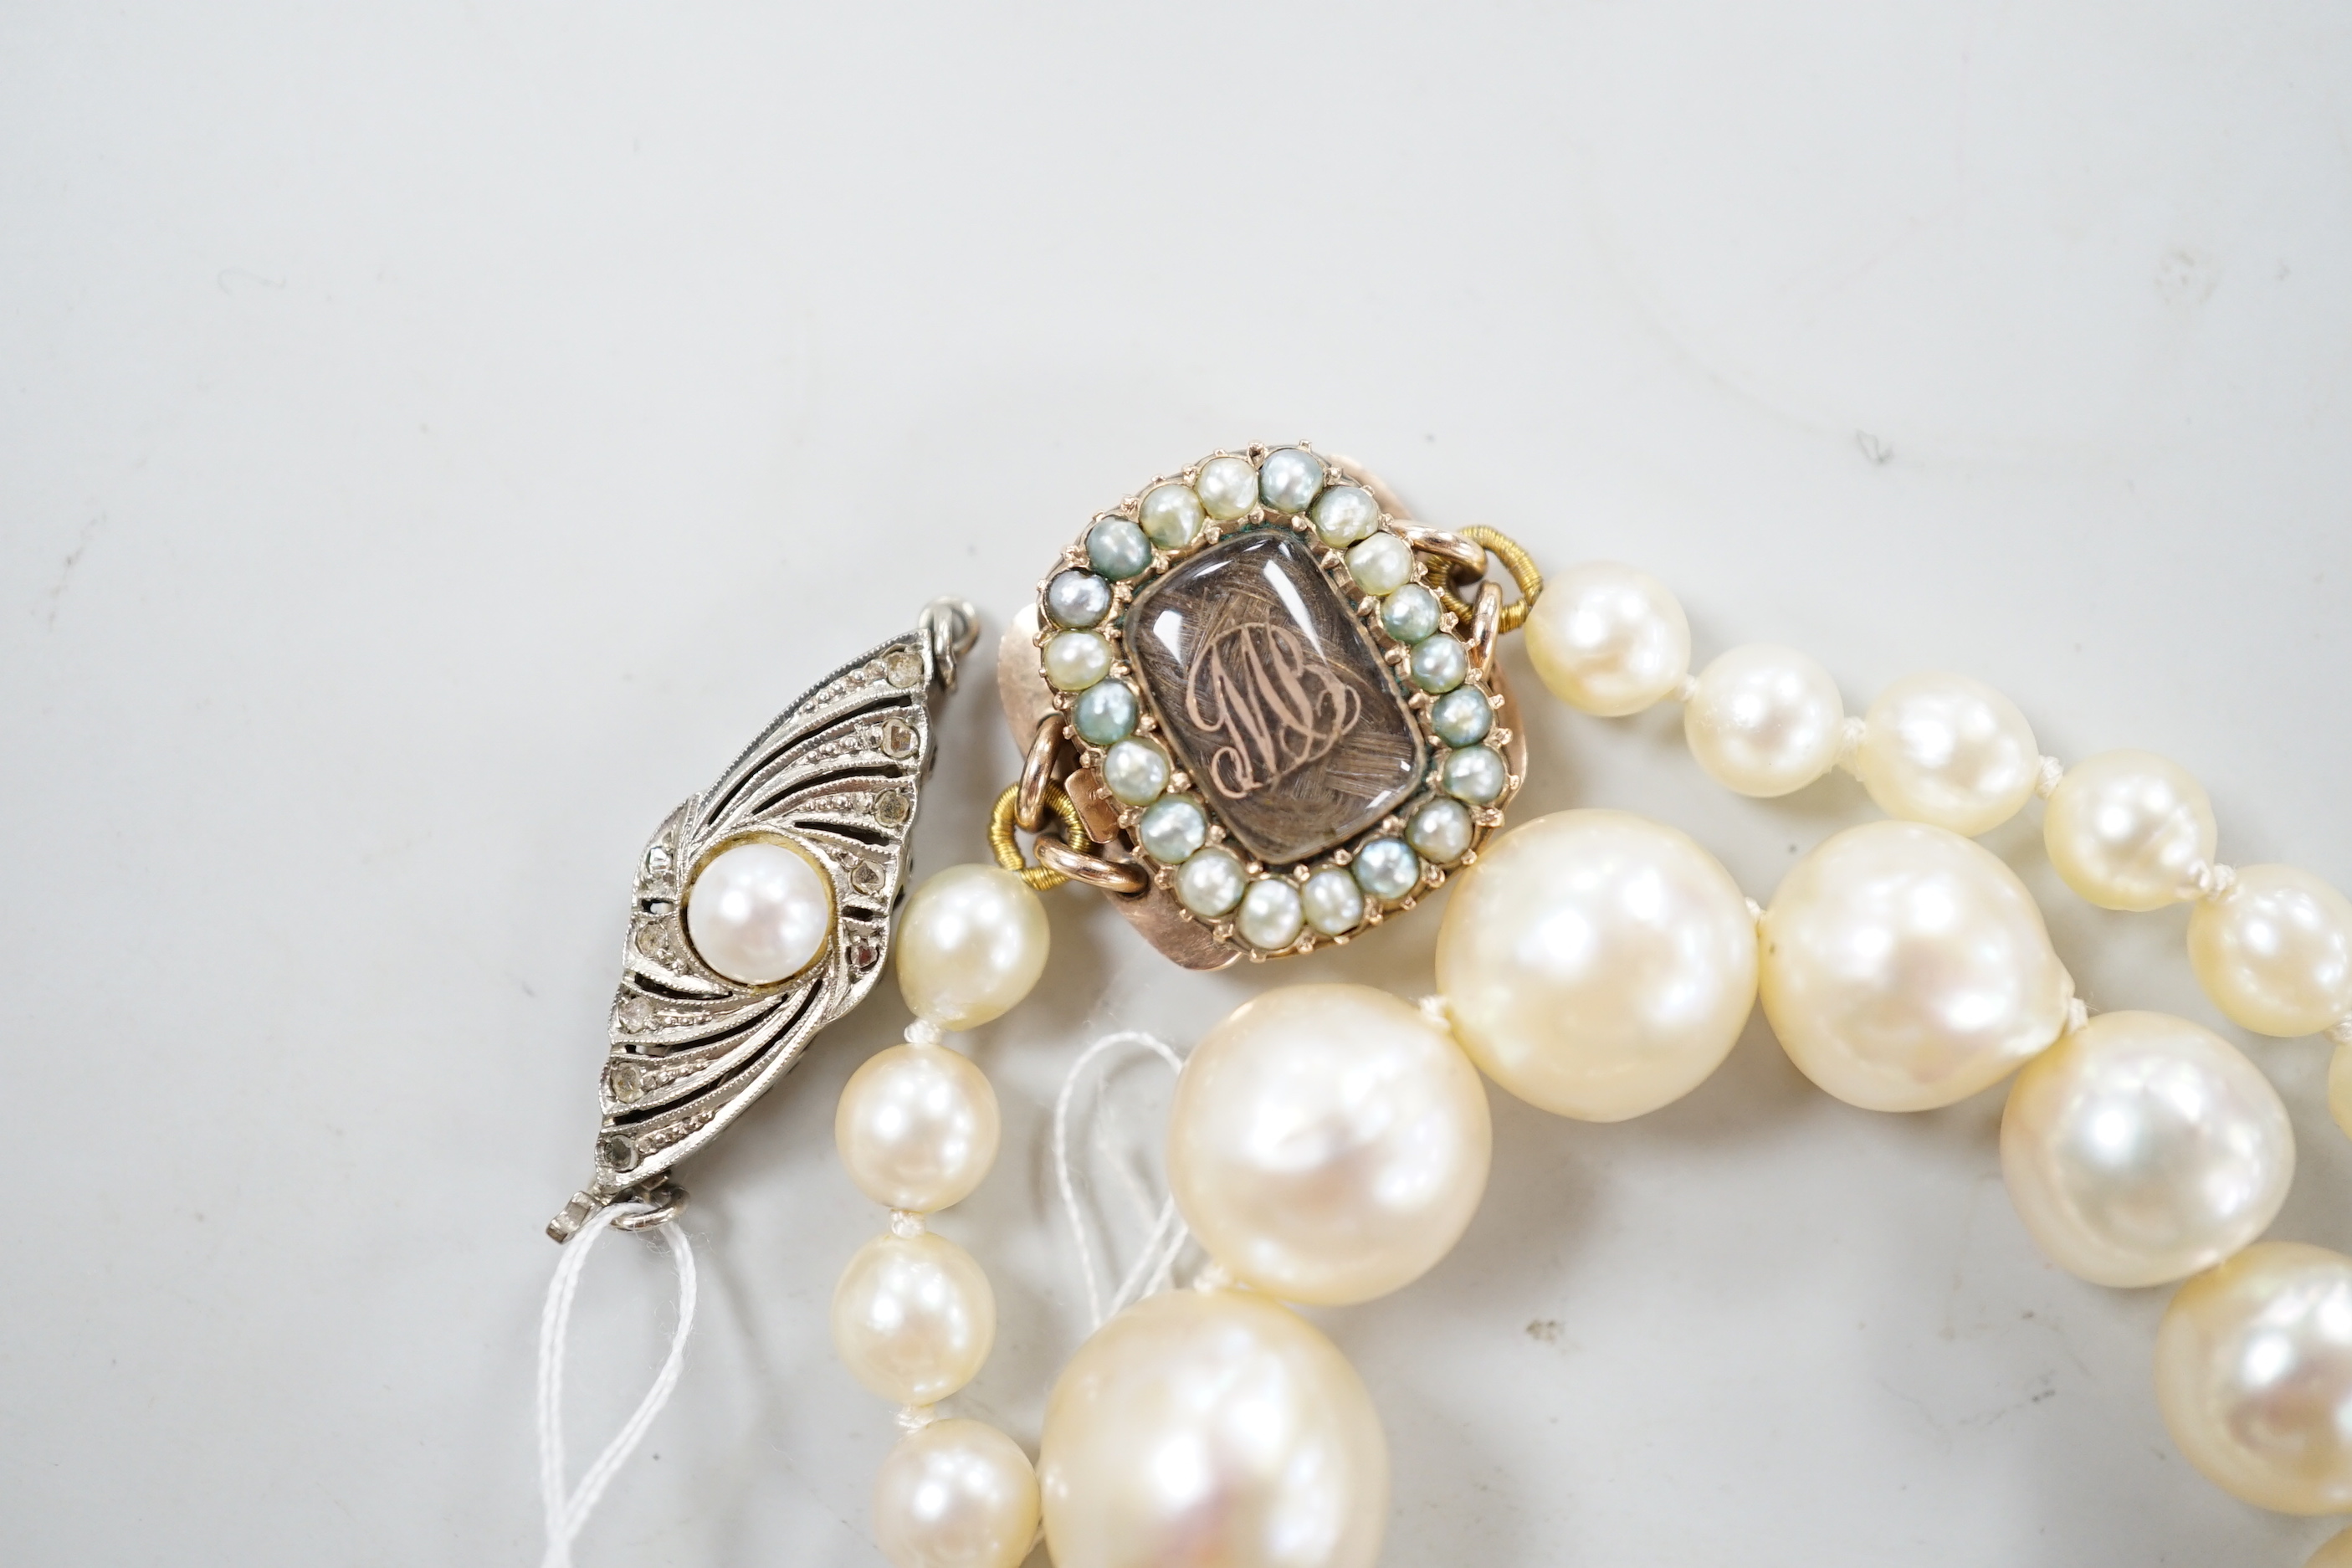 A single strand graduated cultured pearl necklace, now with an earlier 19th century seed pearl and plaited hair set clasp, 76cm, together with original clasp.